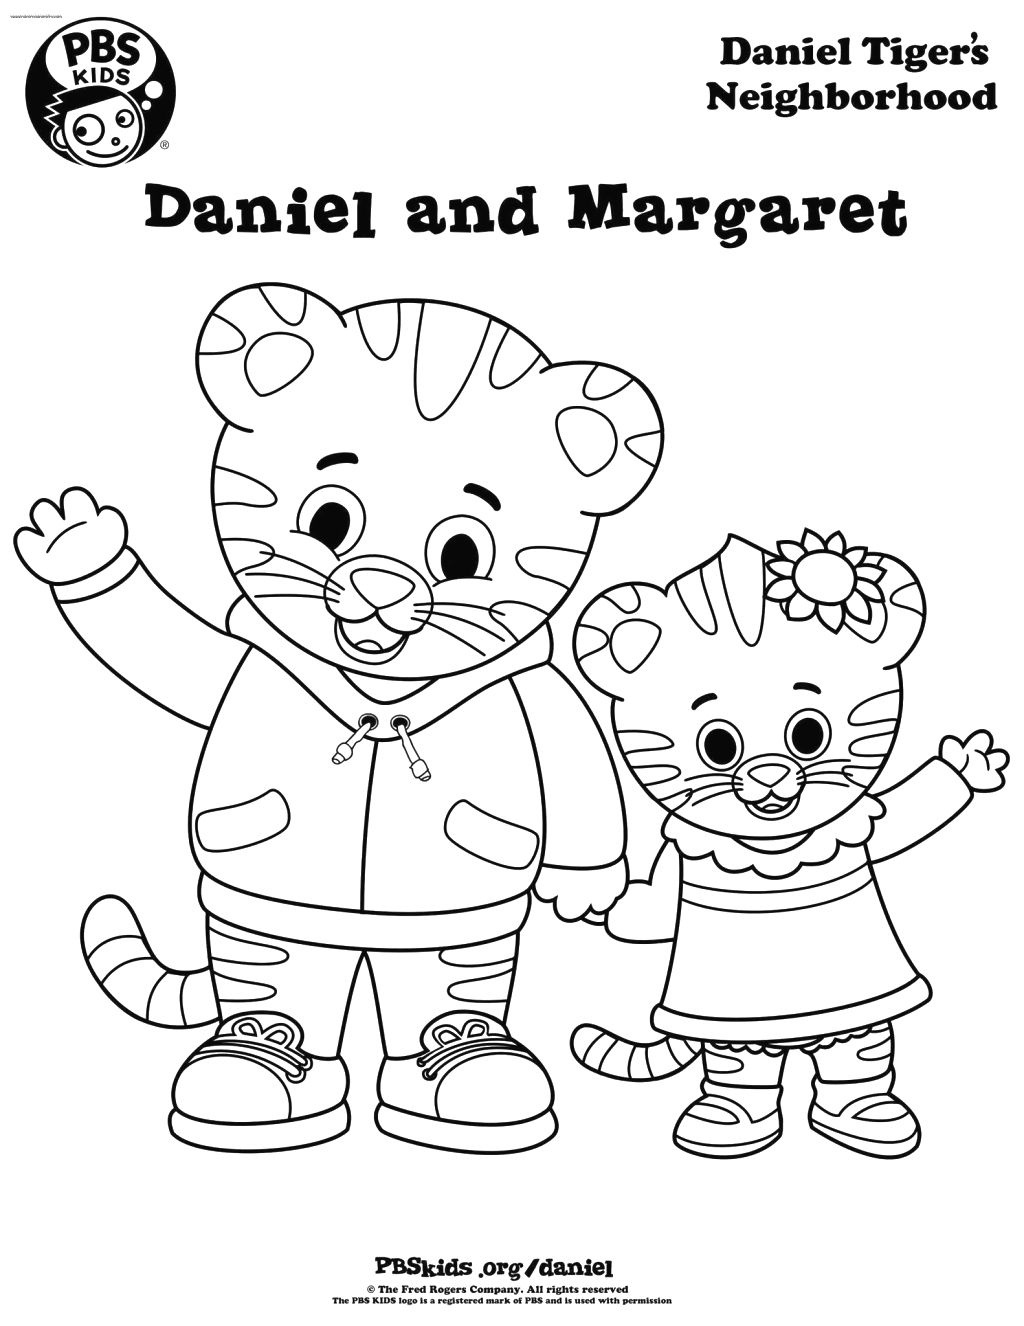 Daniel Tiger Coloring Pages - Best Coloring Pages For Kids - Free Printable Daniel Tiger Coloring Pages